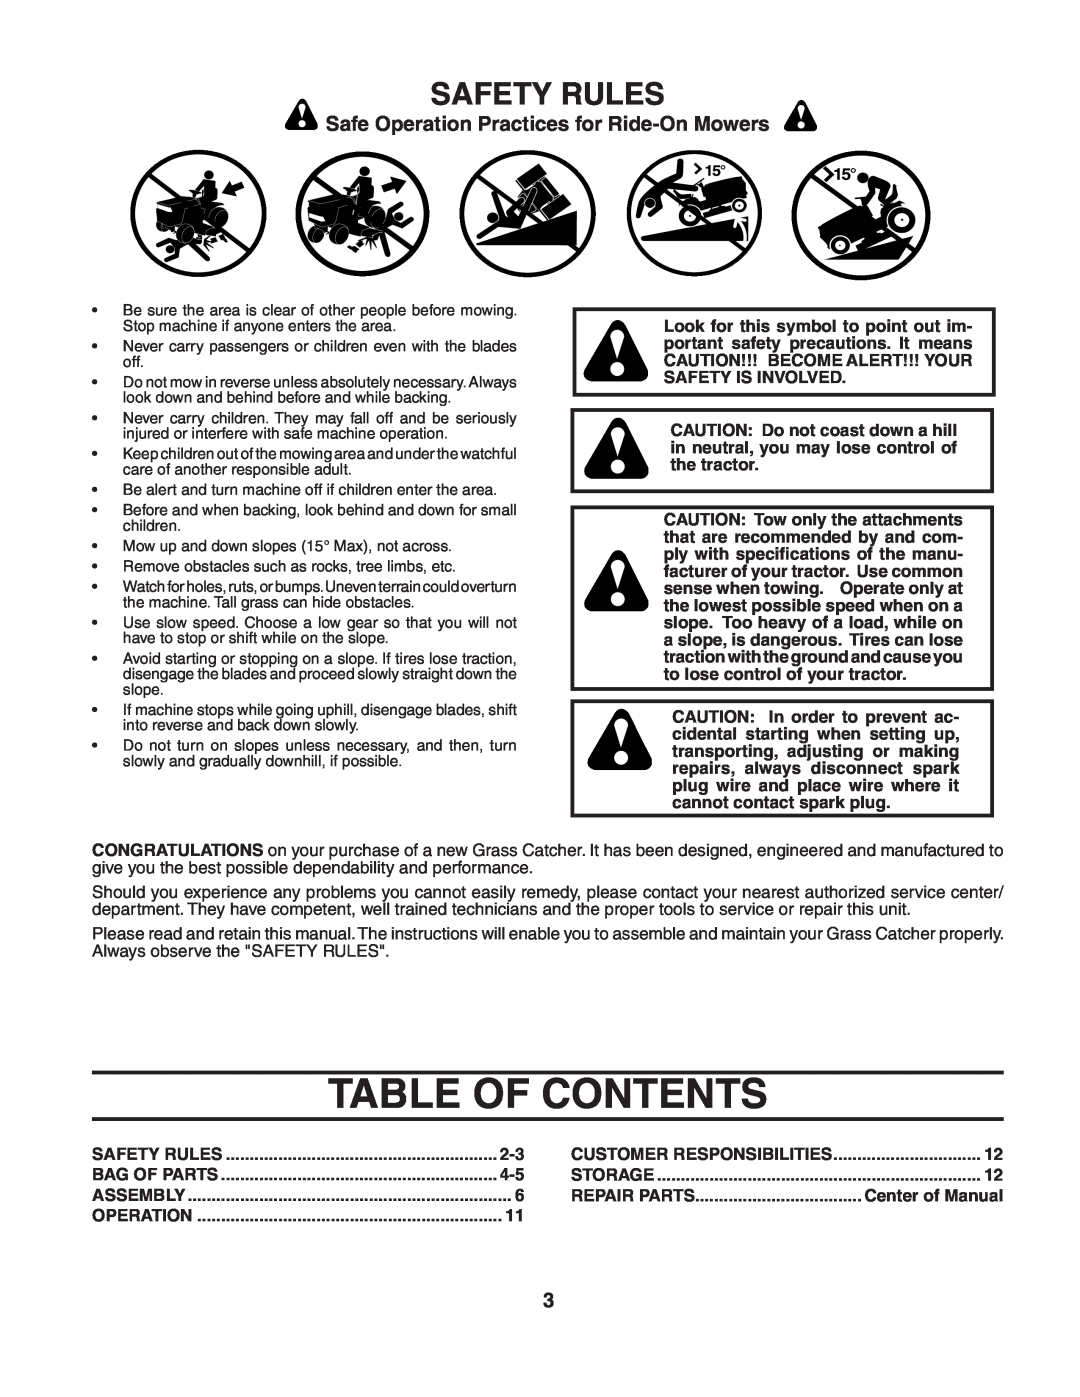 Poulan CR38C, 532140602, 954 04 04-01 Table Of Contents, Customer Responsibilities, Center of Manual, Safety Rules 